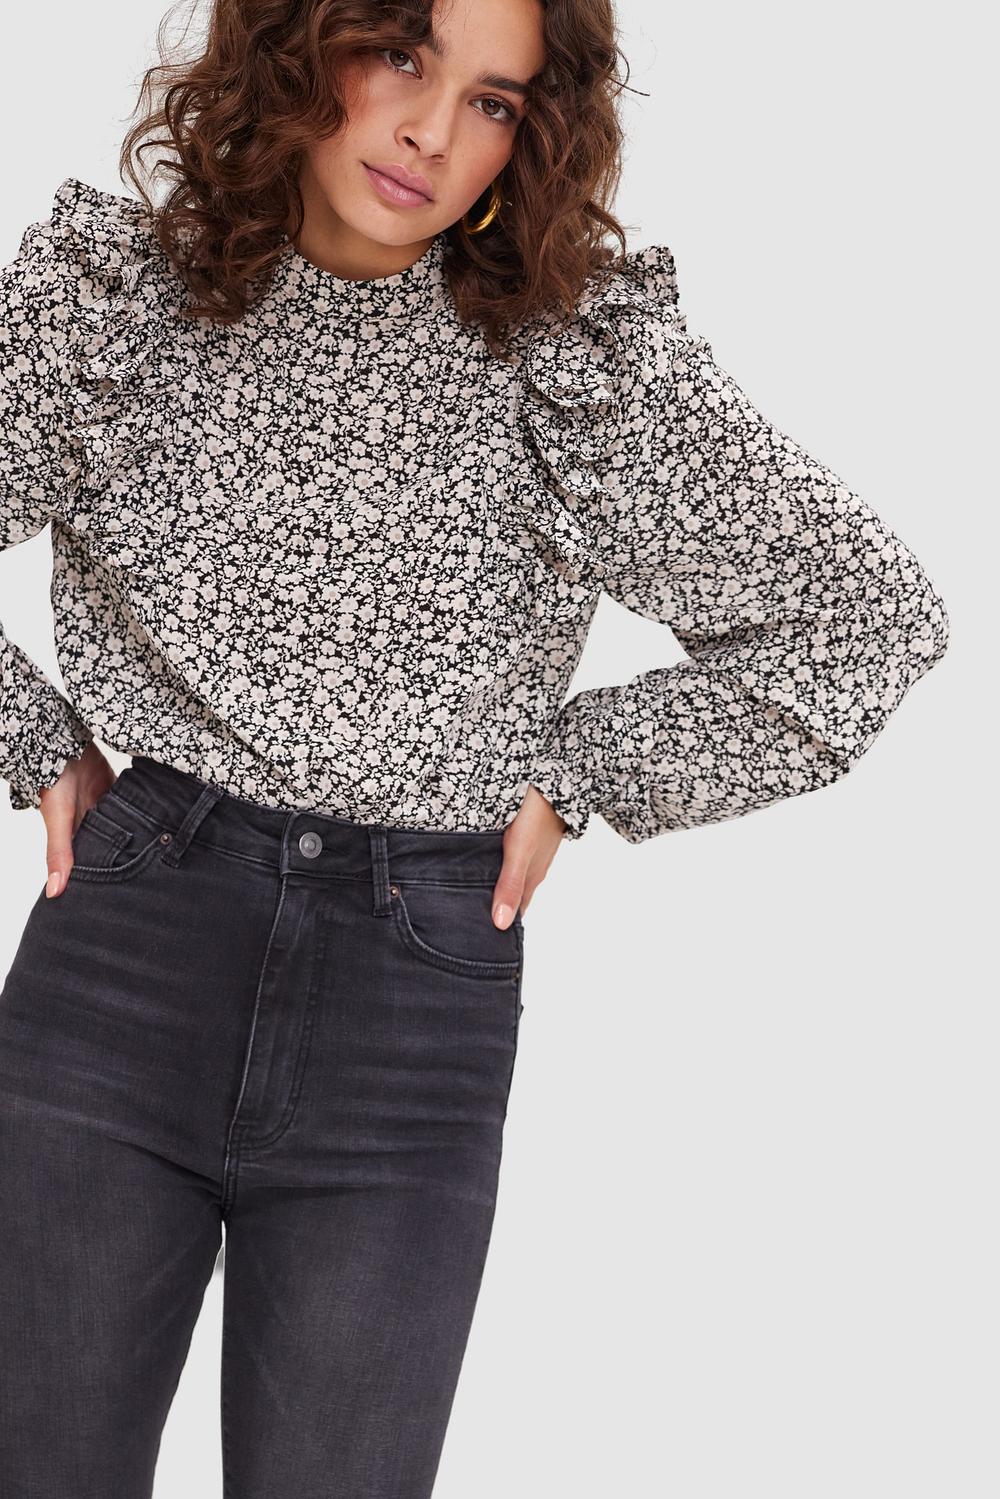 Black blouse with floral print